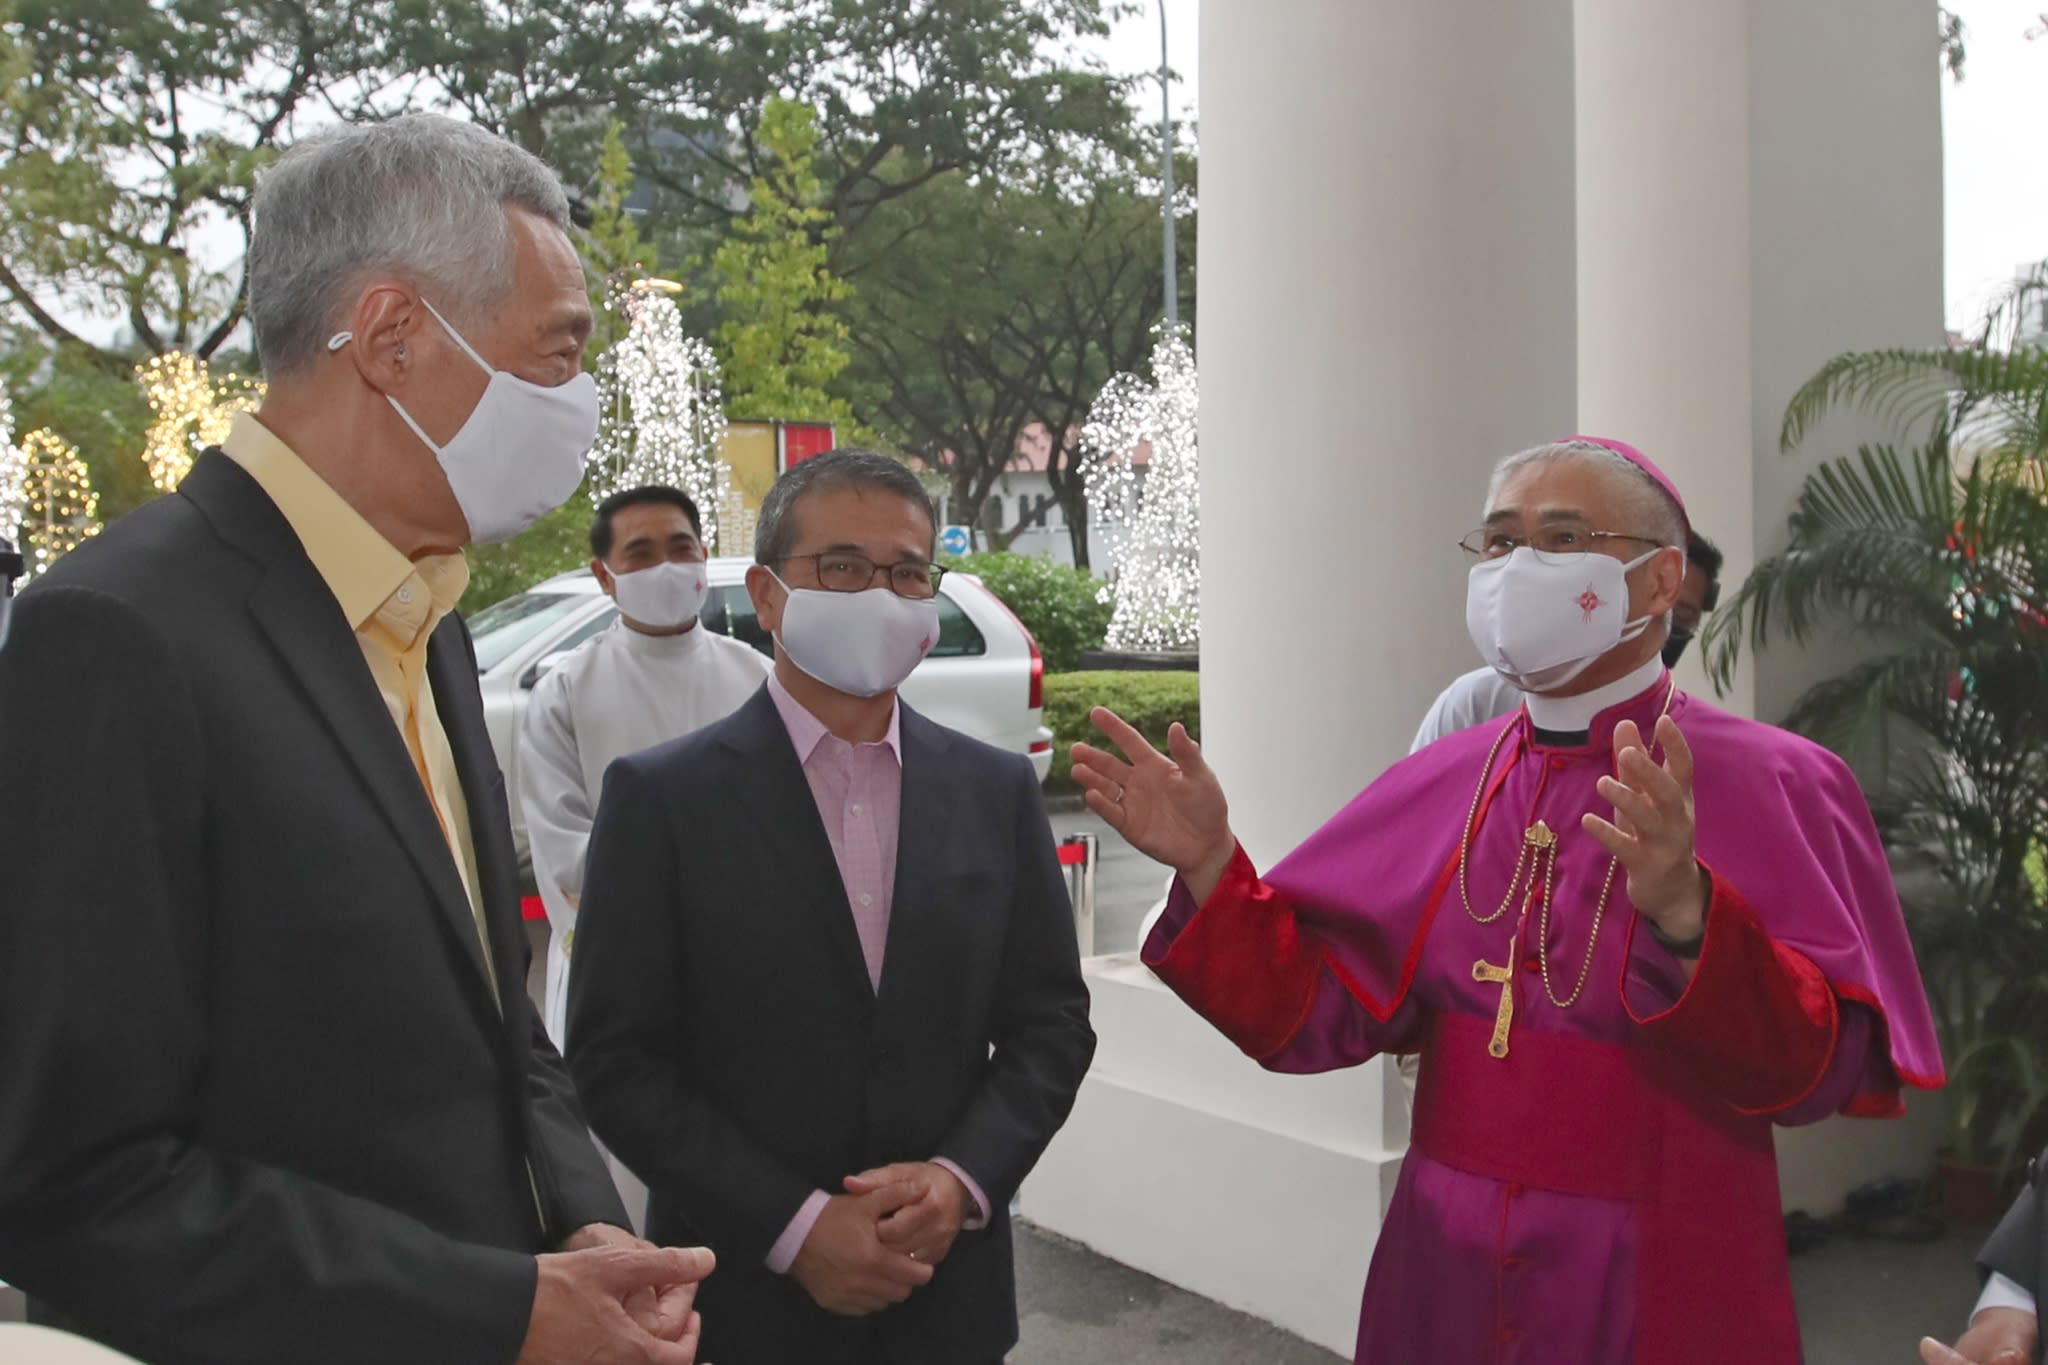 Prime Minister Lee Hsien Loong (left) pictured with Archbishop Goh (right) at the Cathedral of the Good Shepherd in December 2021 at an event to mark the bicentennial of the Catholic Church in Singapore.